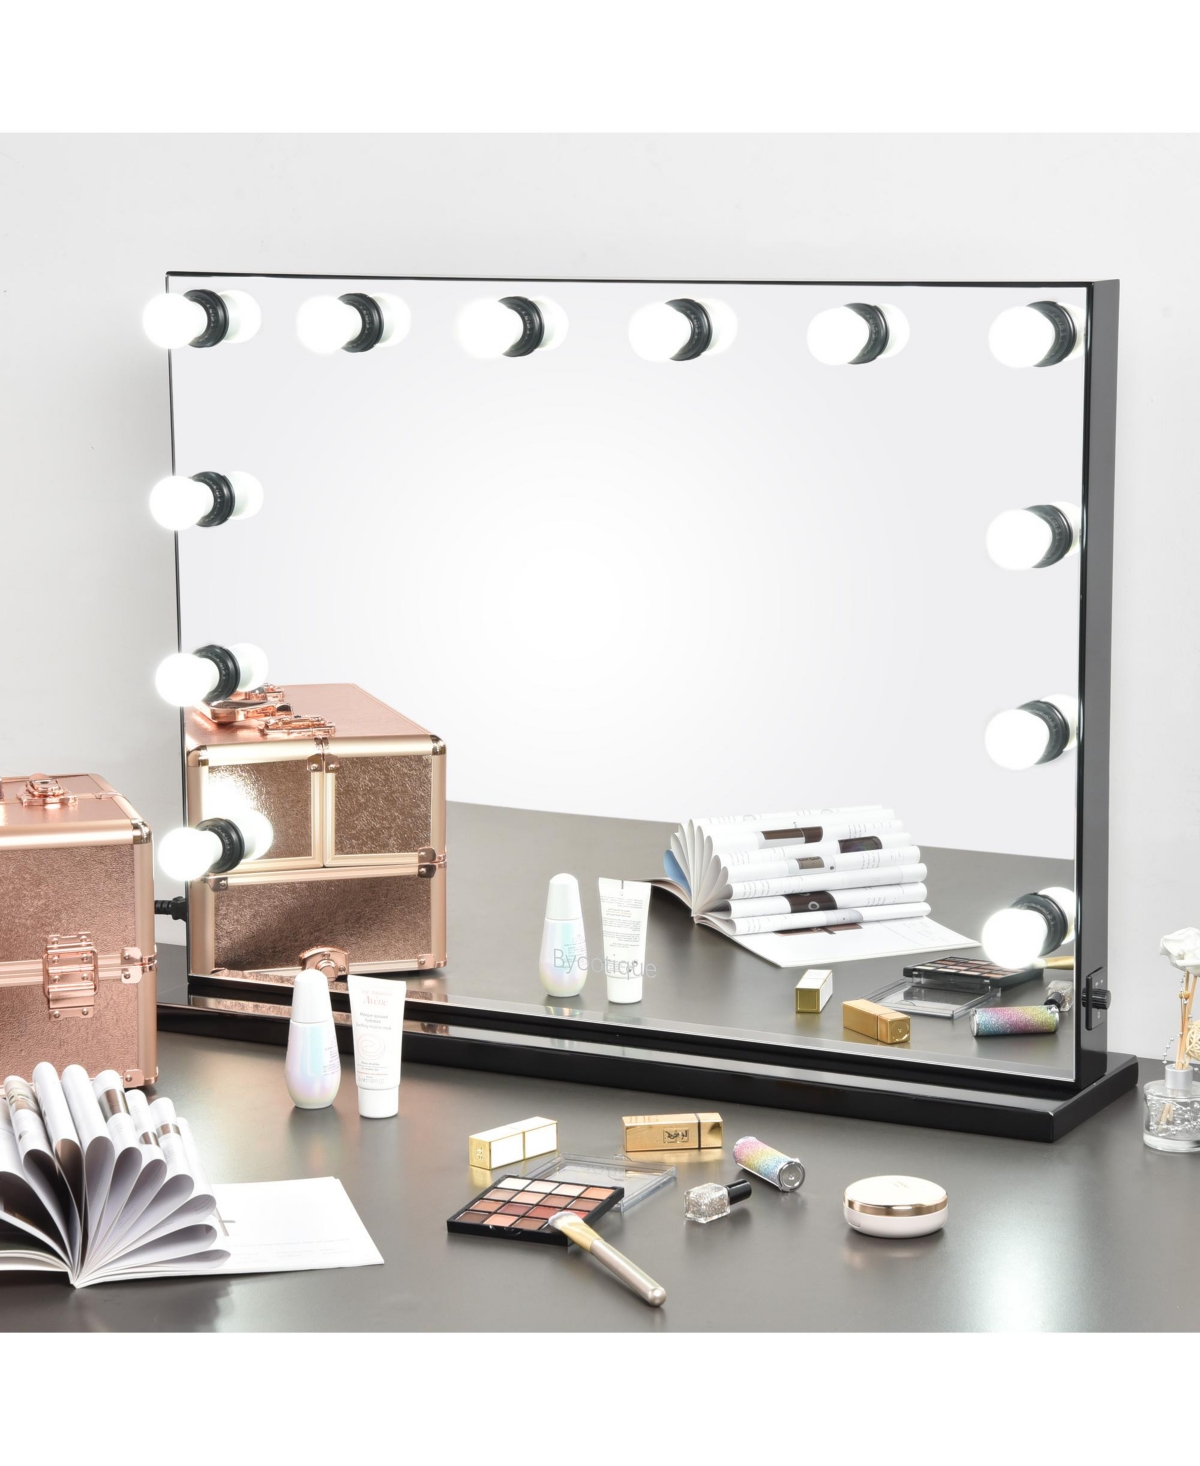 33"x24" Hollywood Lighted Vanity Makeup Mirror 12 Led Bulbs Studio - Open White